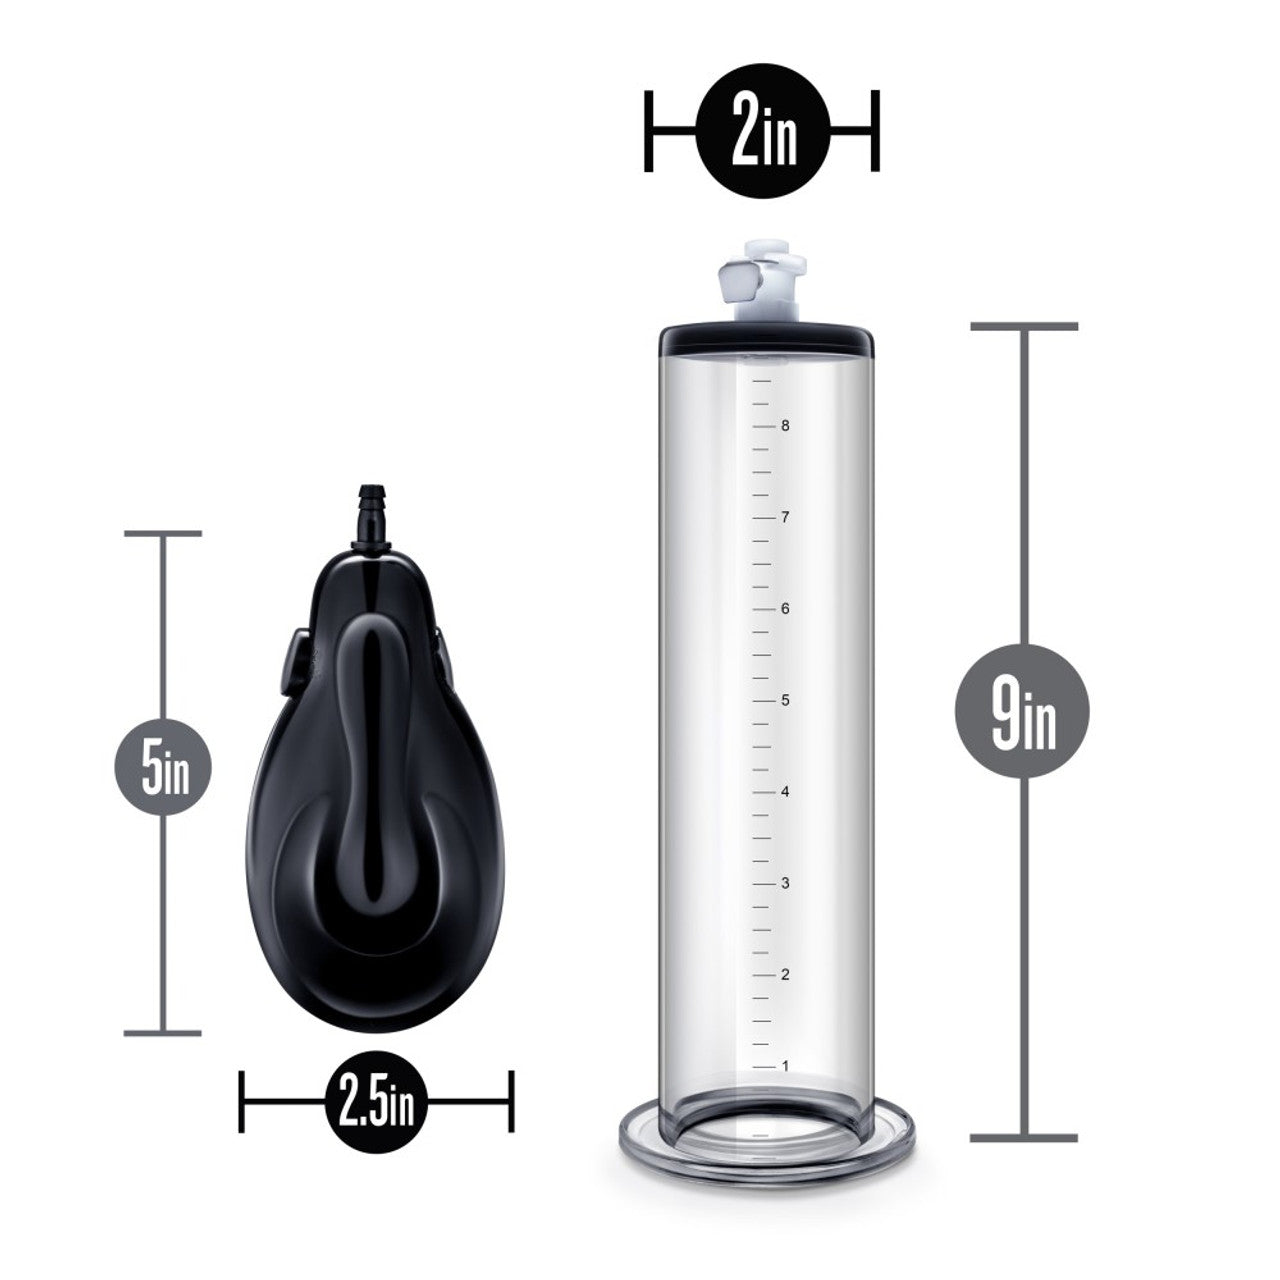 Performance VX9 Auto Penis Pump 9in - Clear